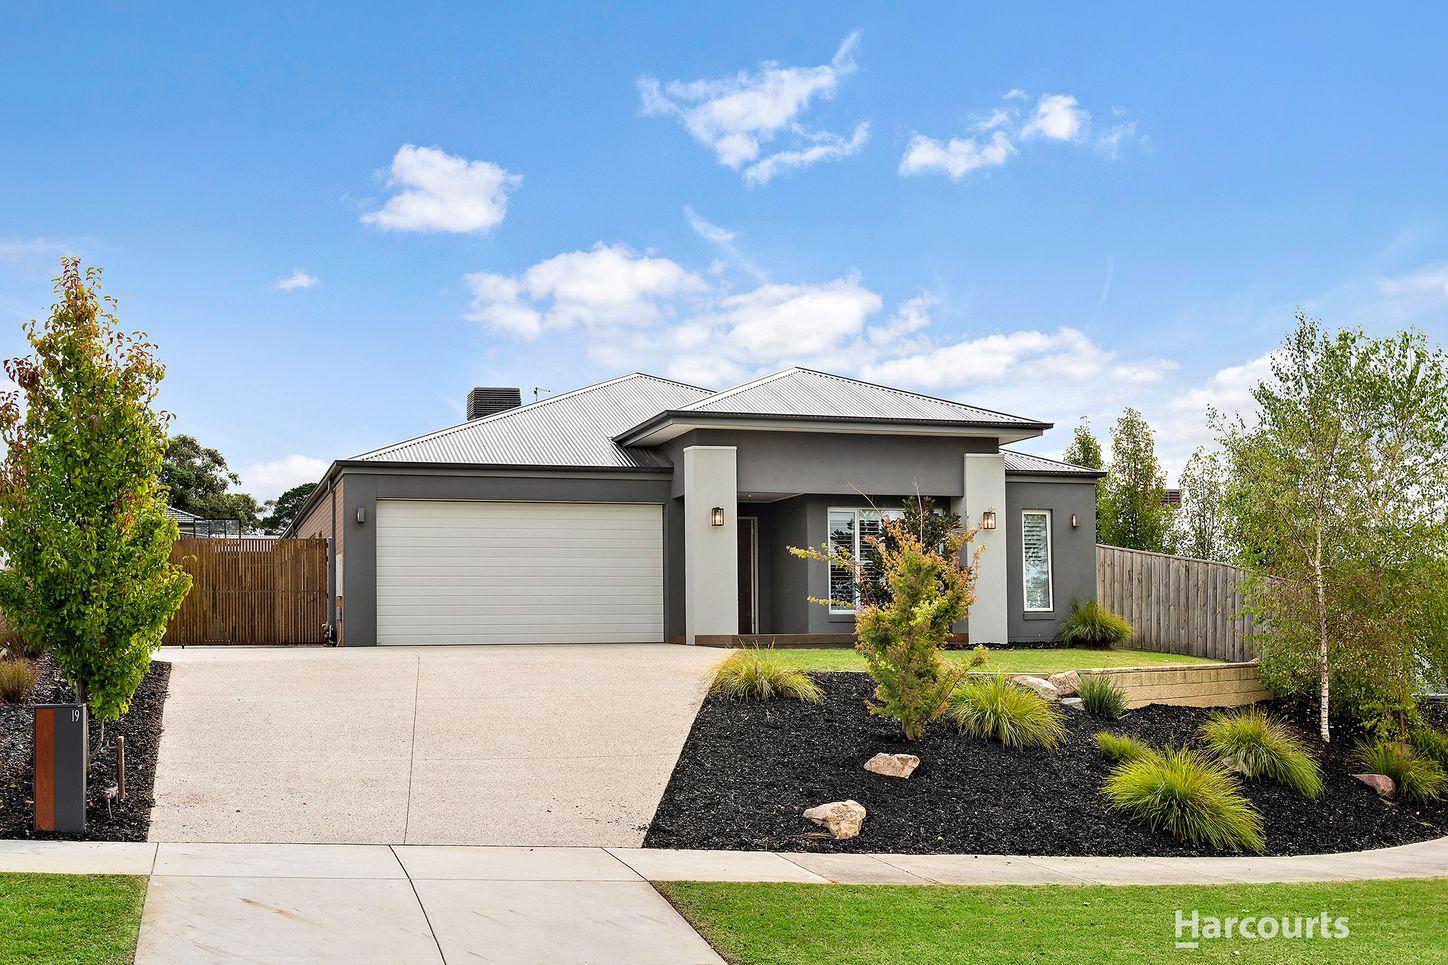 Prop-GPT: House: Melbourne - South East, VIC Garfield North, VIC 3814 Victoria 3814